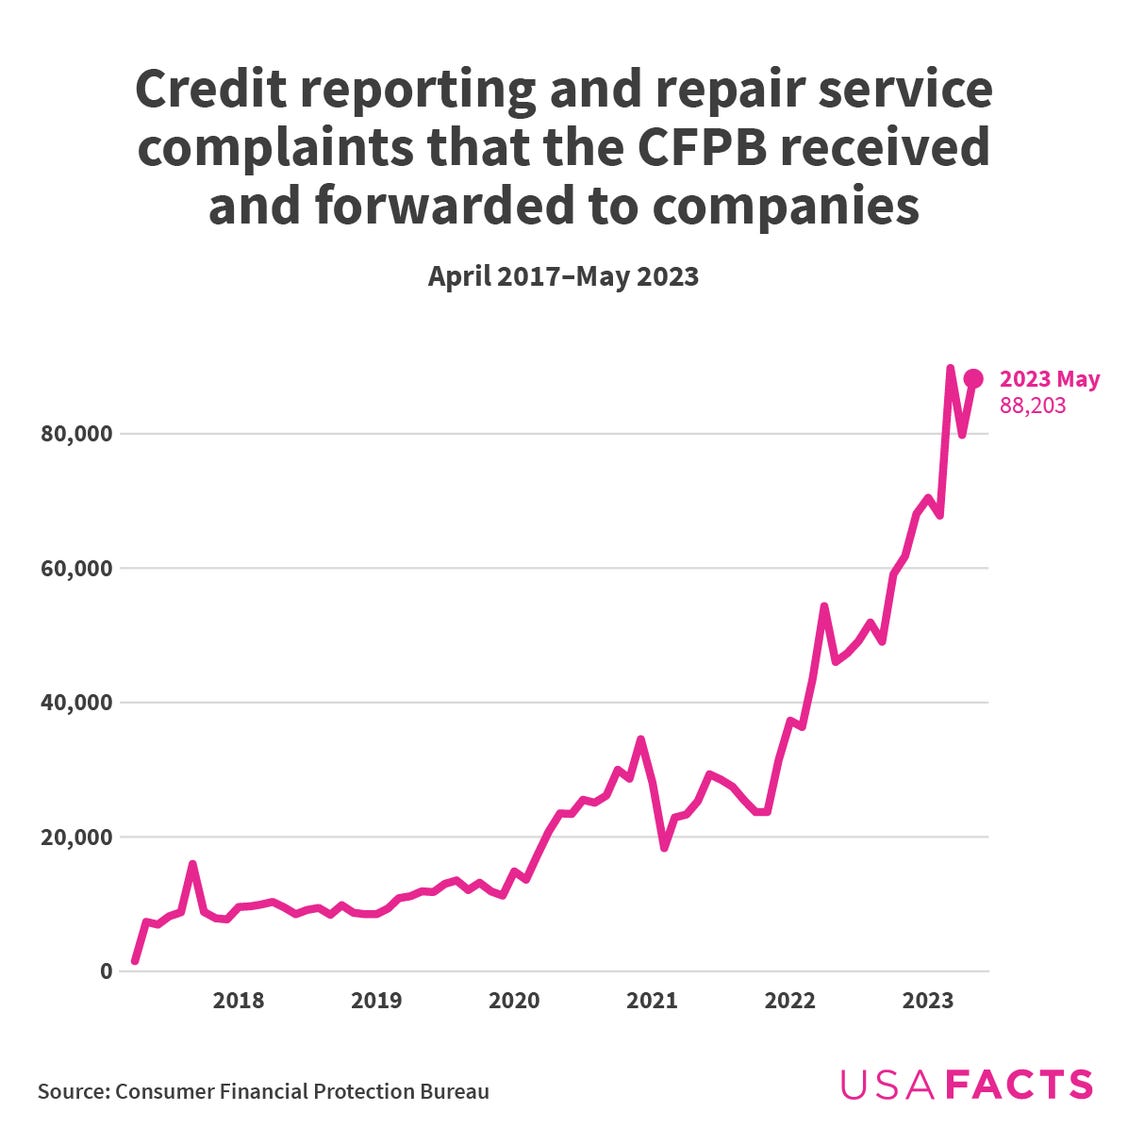 Chart of credit report/repair service complaints stayed below 20,000 from 2017 to 2020. They started climbing and reached 88,203 in May 2023.